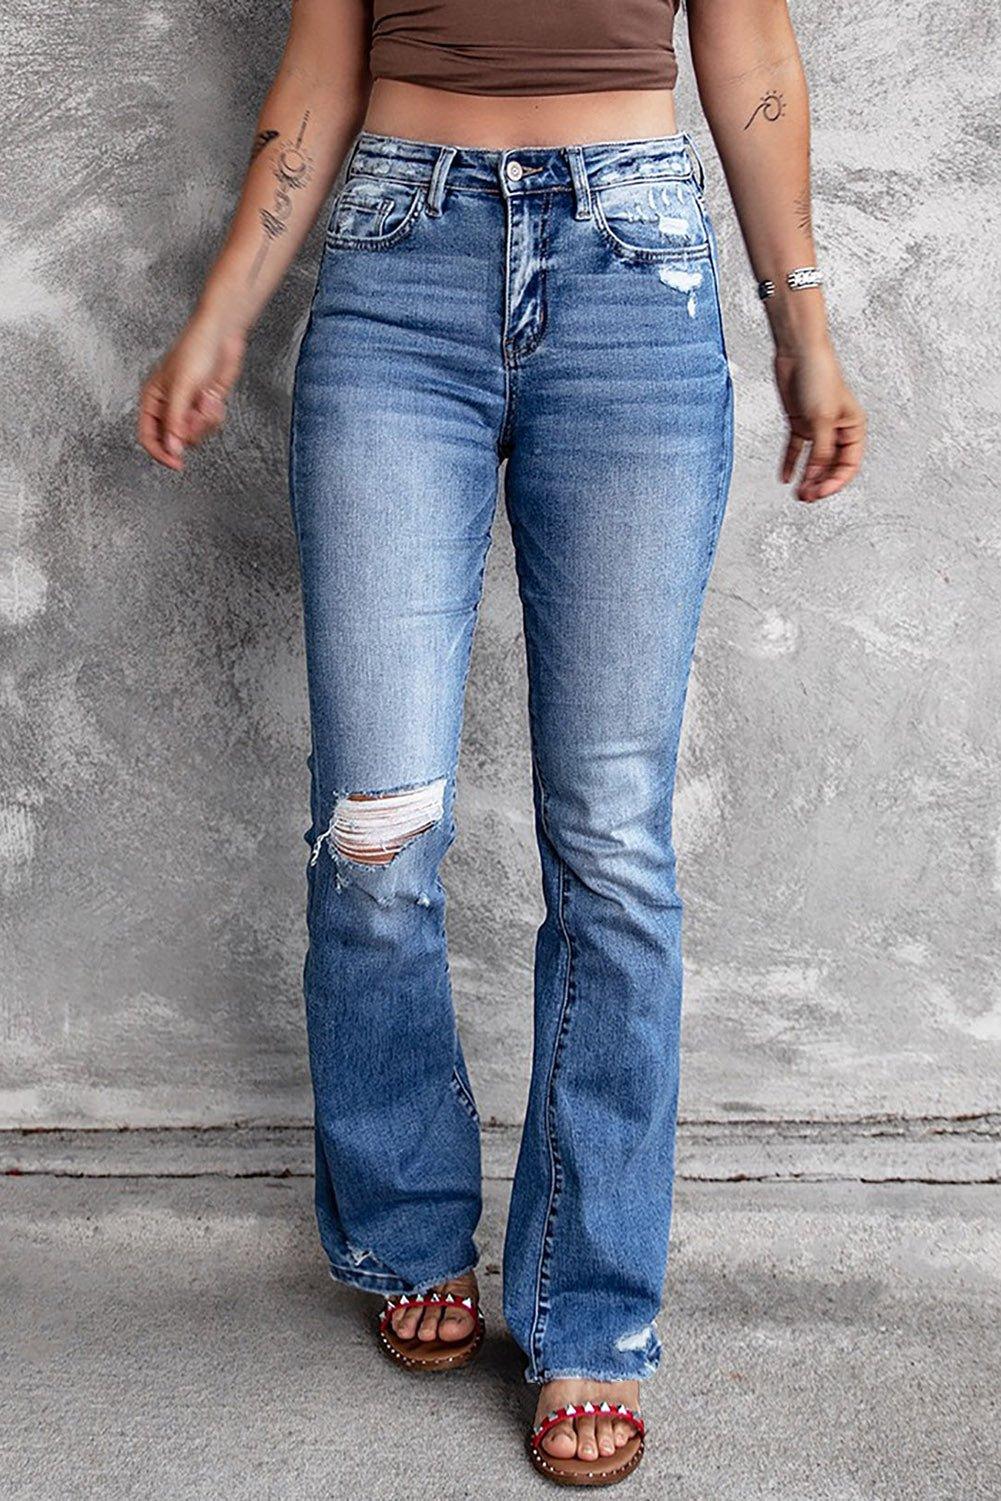 Distressed Flared Jeans with Pockets - Lucianne Boutique